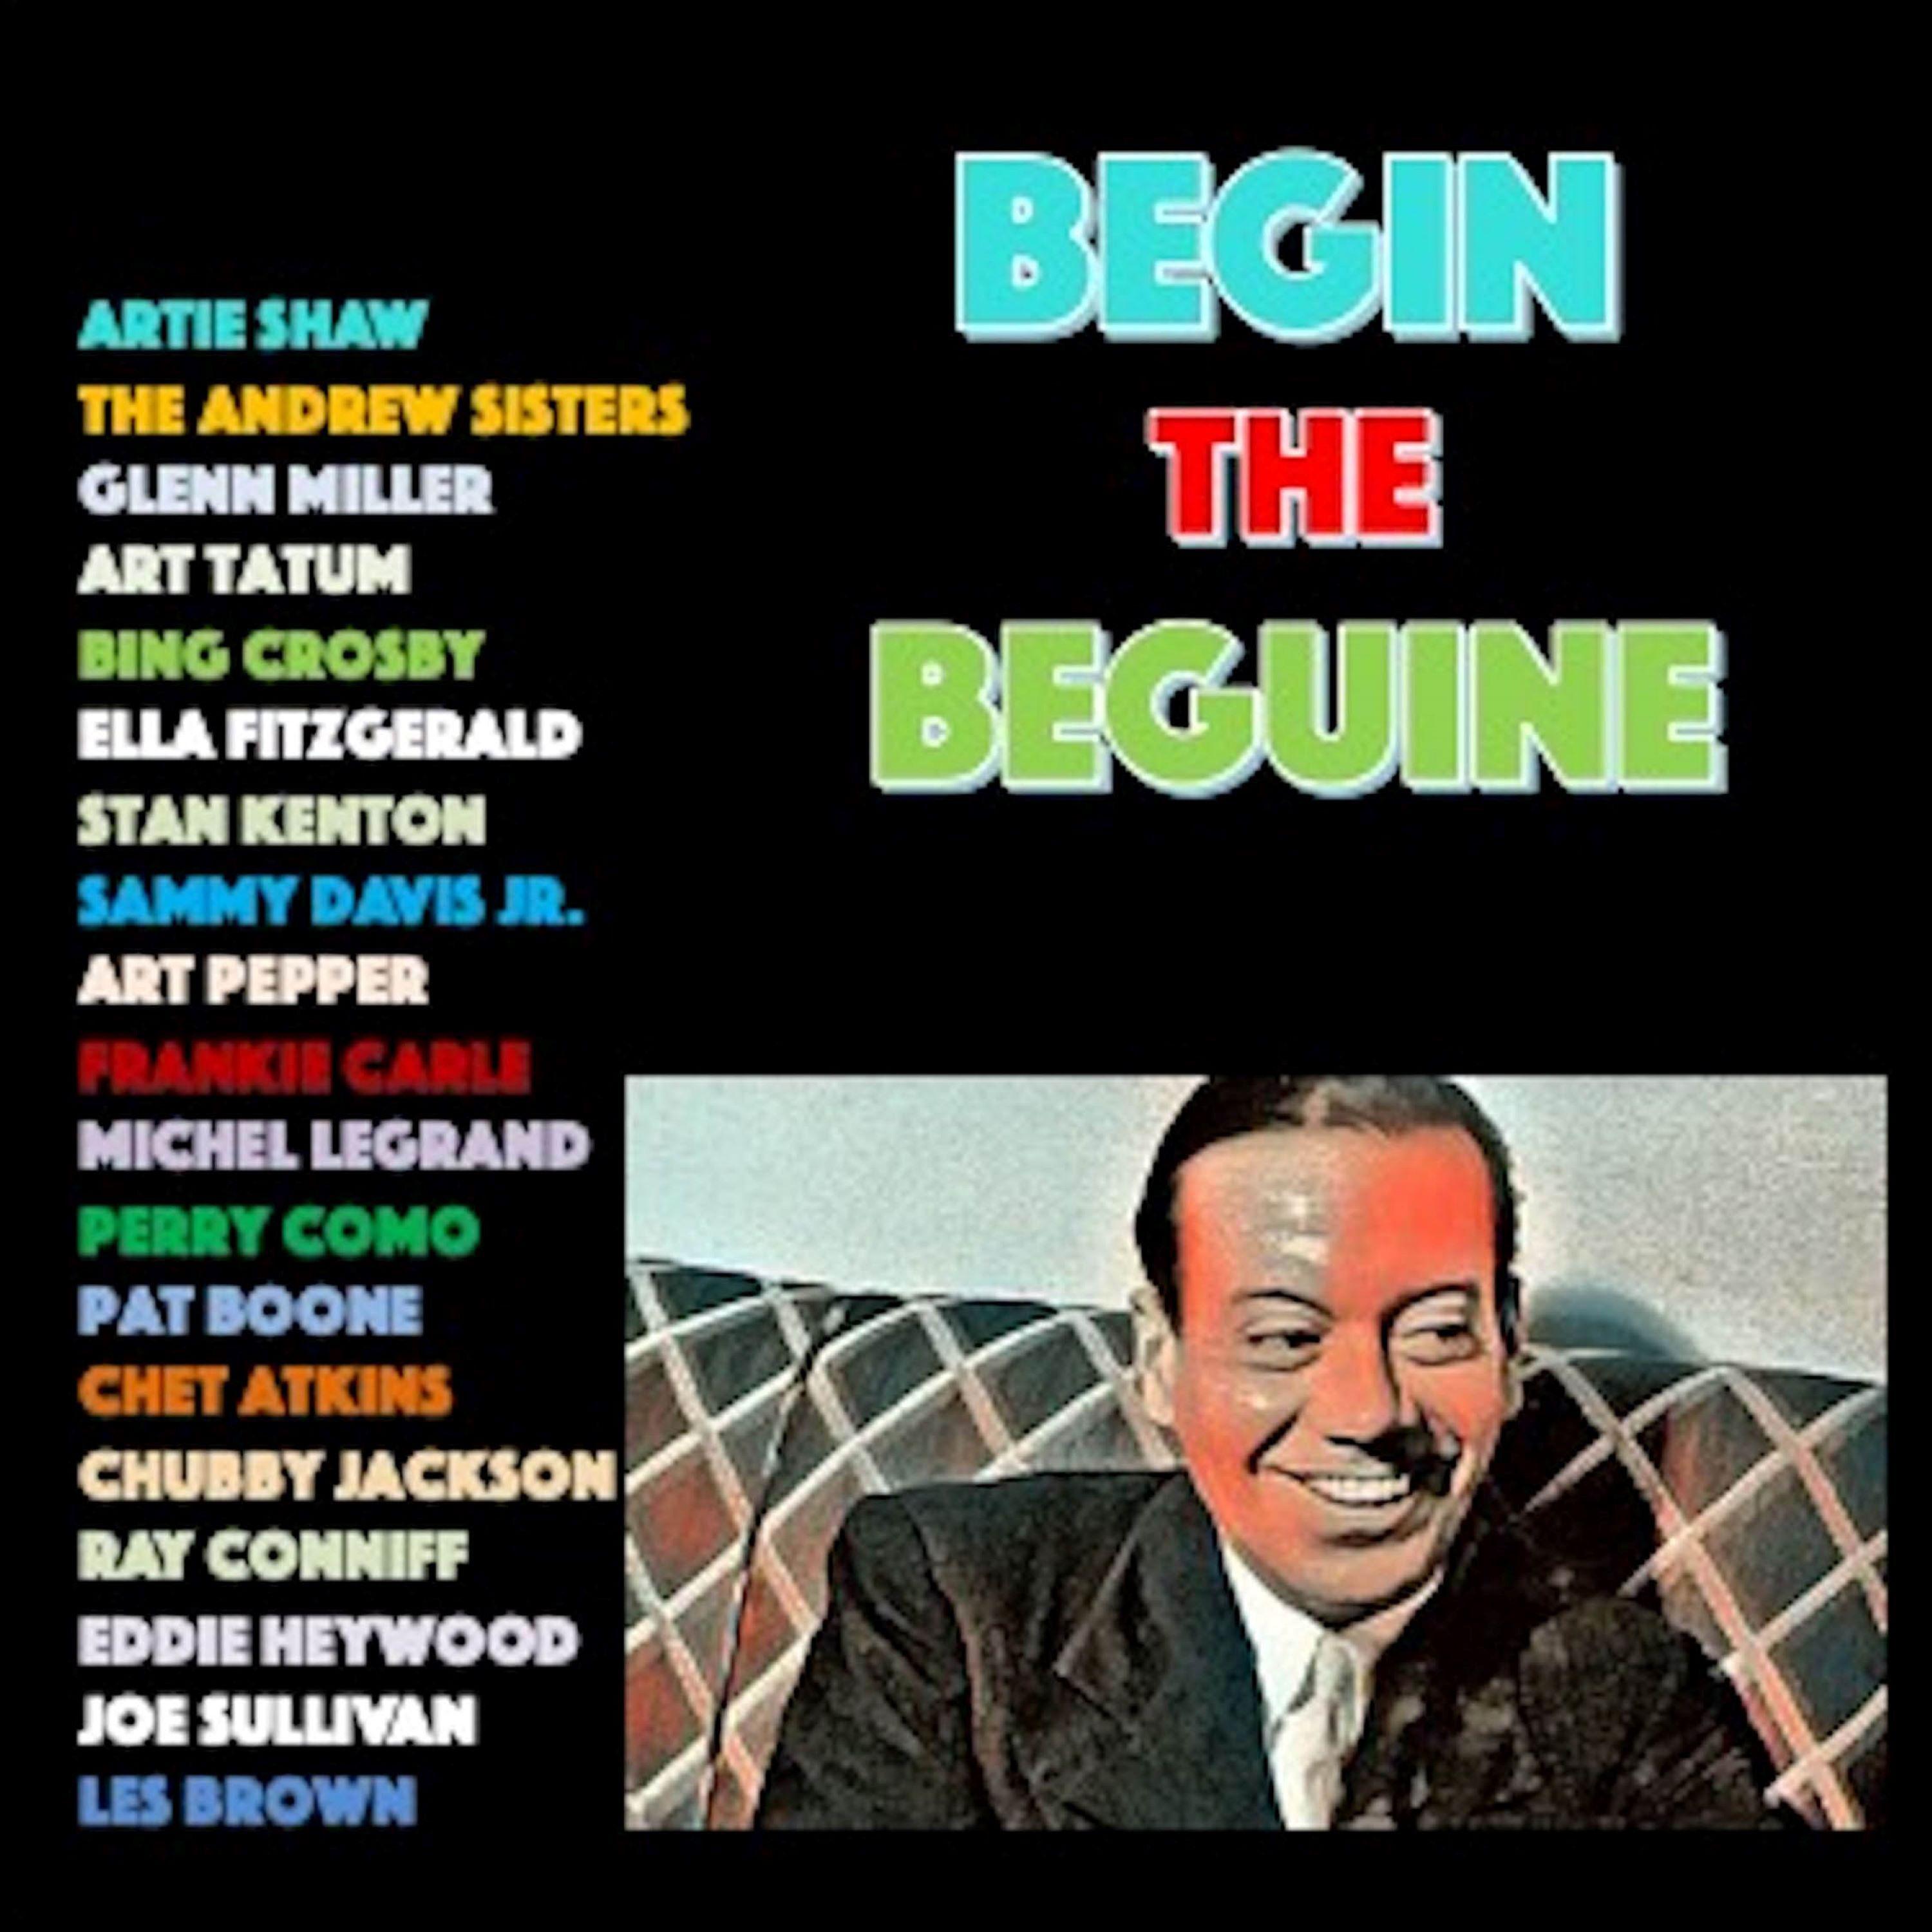 Glenn Miller and His Orchestra - Begin the Beguine